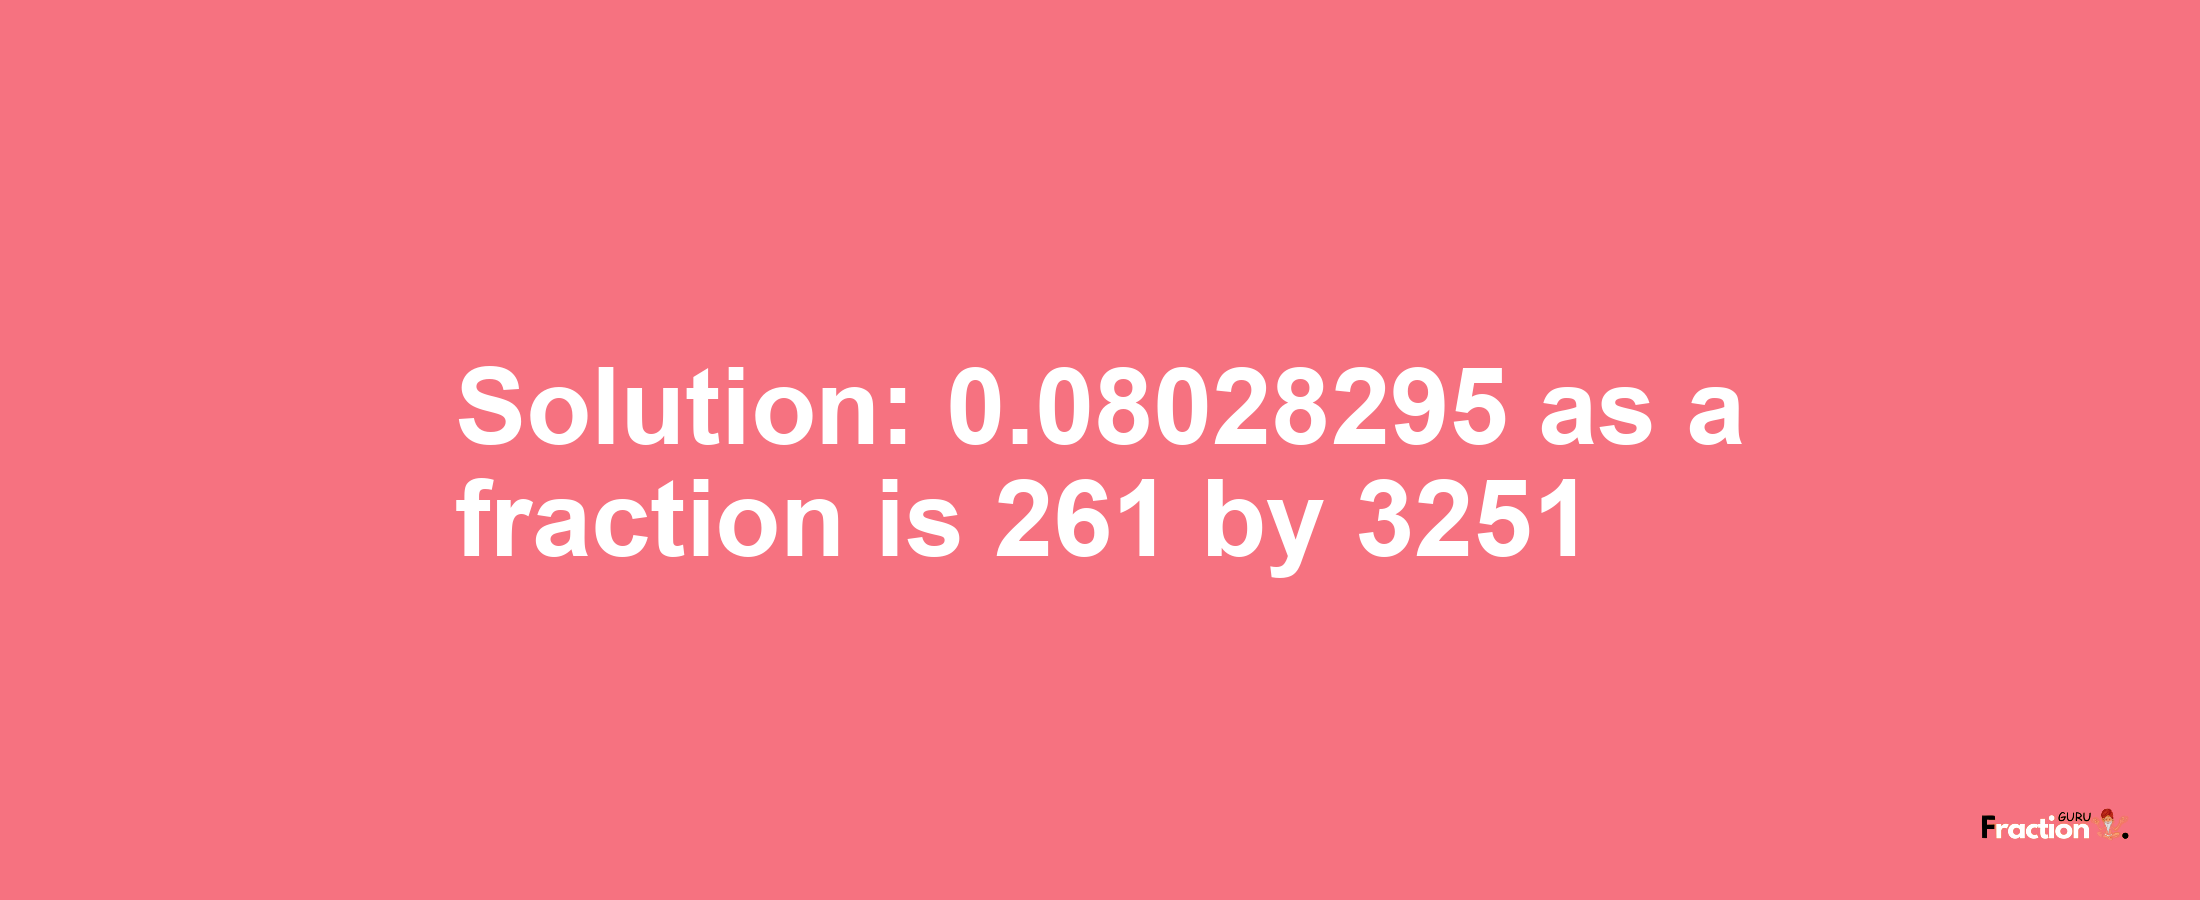 Solution:0.08028295 as a fraction is 261/3251